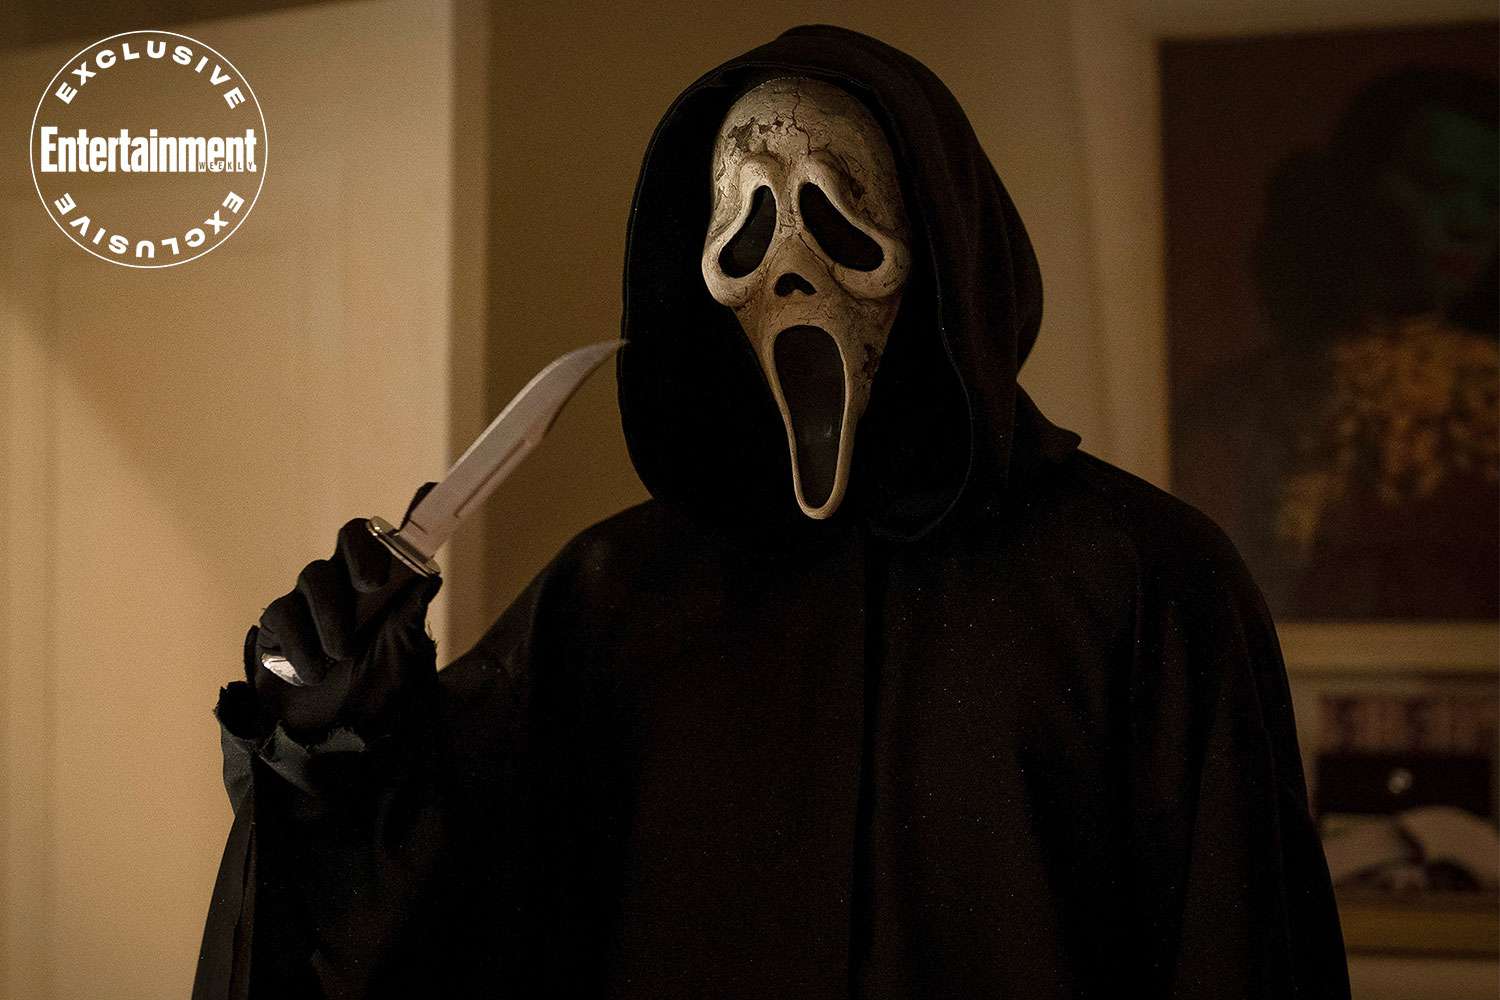 Ghostface in Paramount Pictures + Spyglass Media Group's "Scream VI." © 2022 Paramount Pictures. Ghost Face is a Registered Trademark of Fun World Div., Easter Unlimited, Inc. ©1999. All Rights Reserved.”. Ghost Face is a Registered Trademark of Fun World Div., Easter Unlimited, Inc. ©1999. All Rights Reserved.”